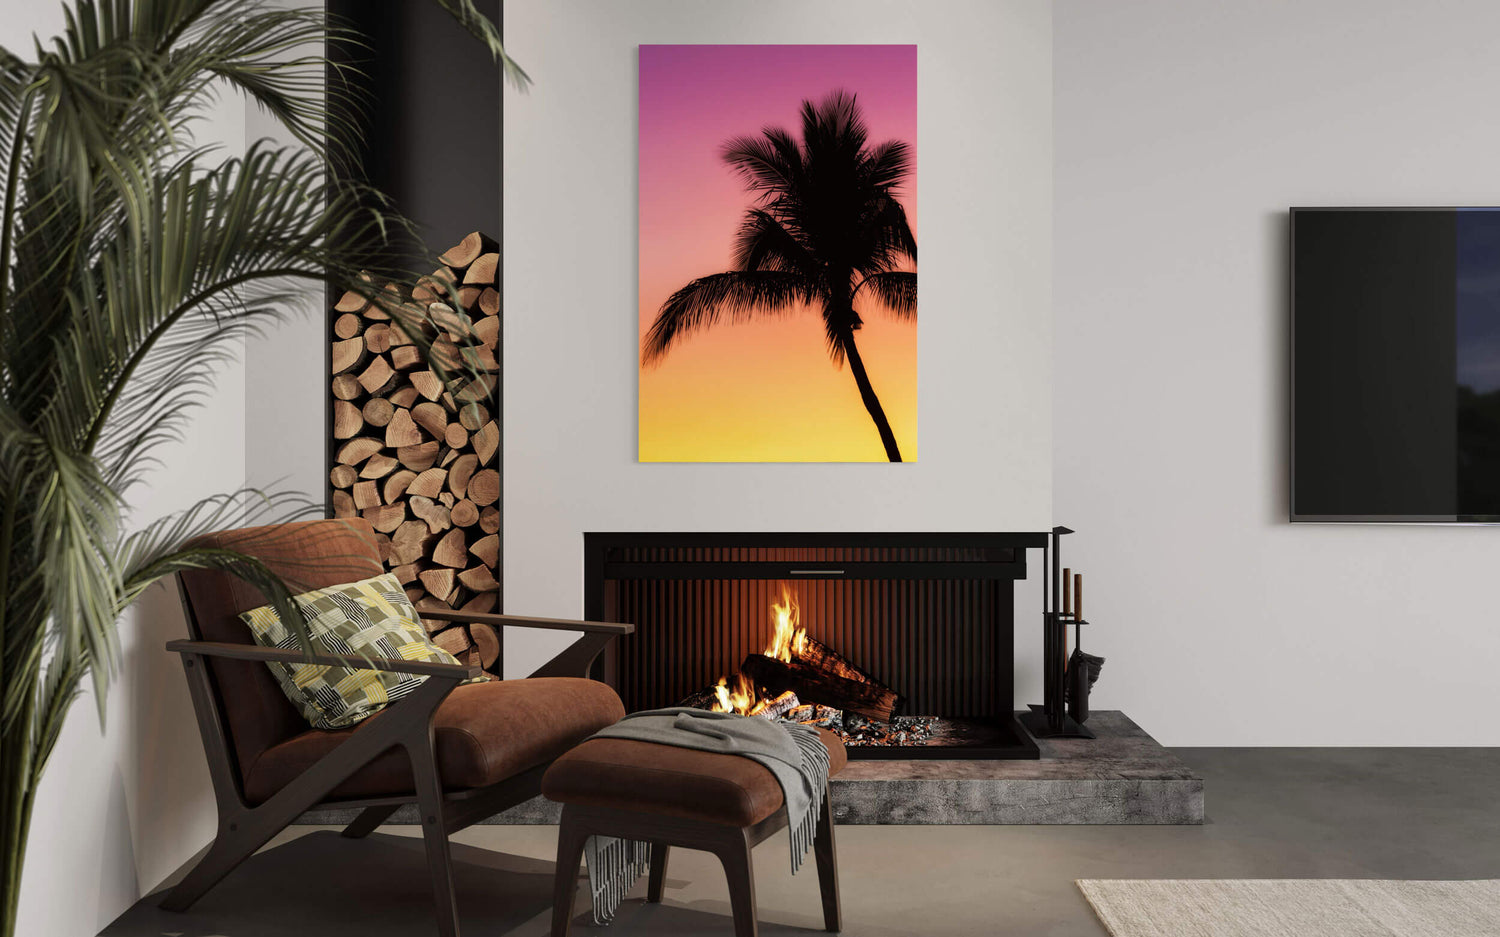 A Key West sunset picture with a palm tree hangs in a living room.